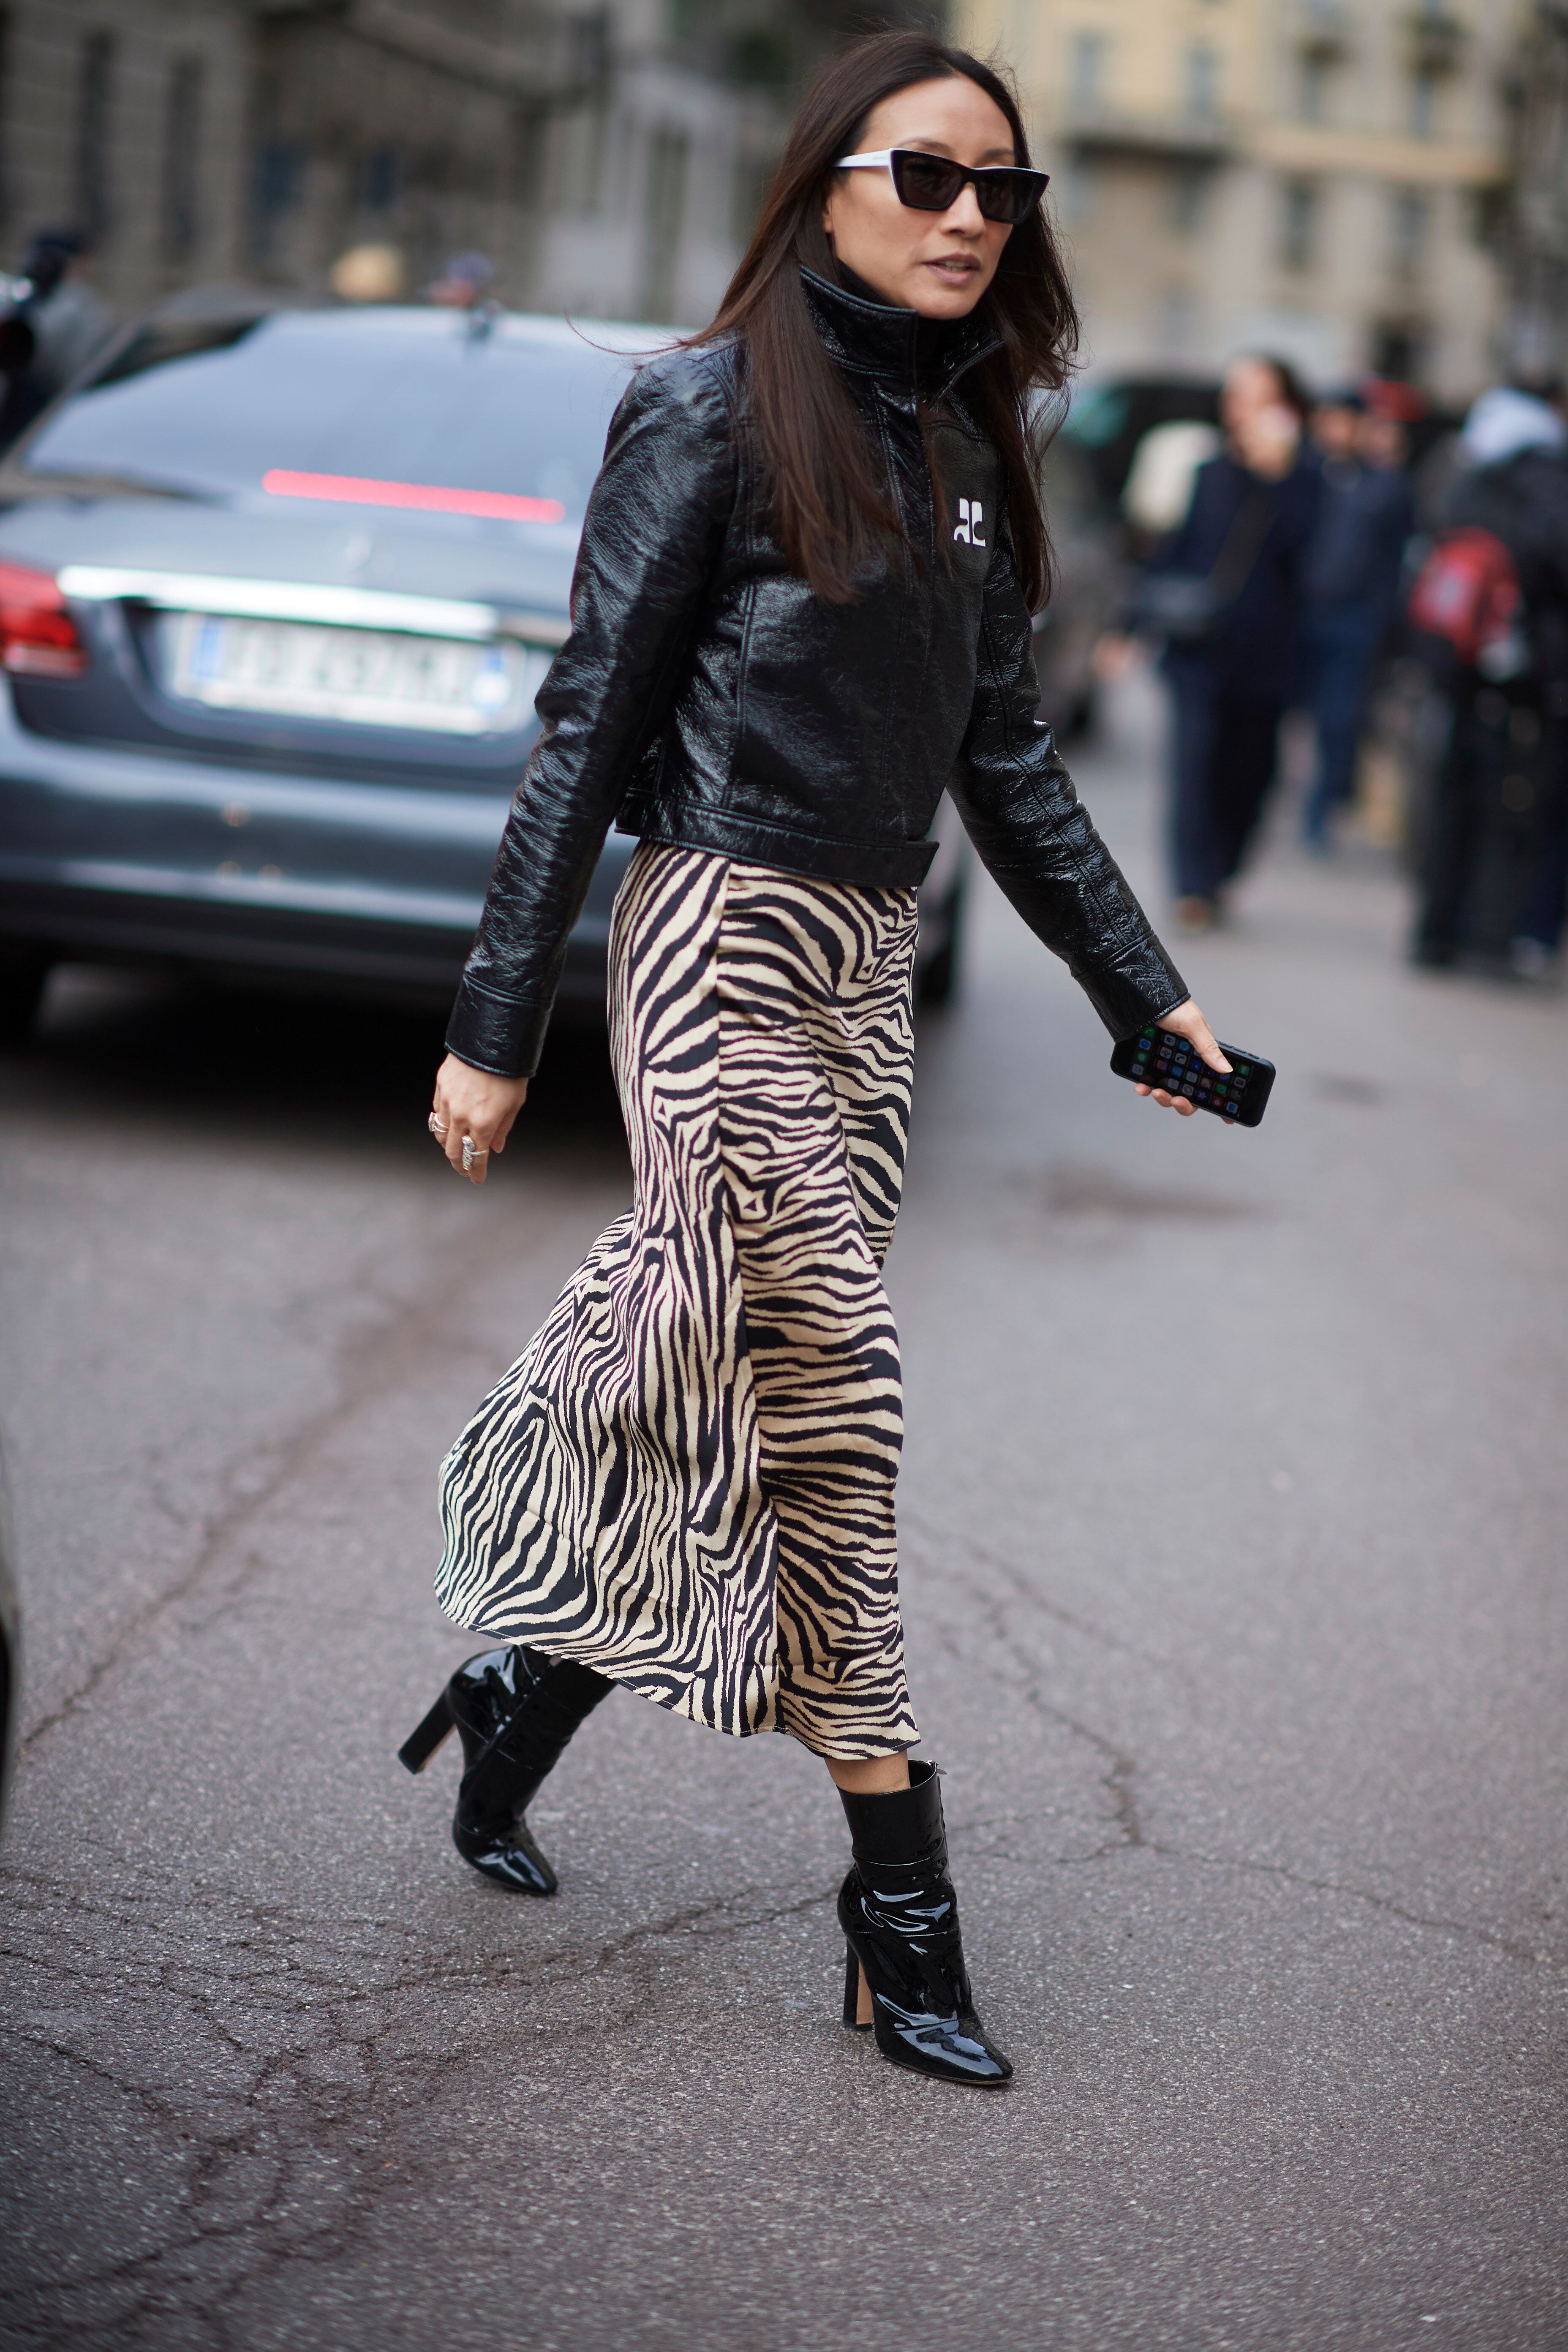 Street style image of a woman wearing a zebra print skirt | ASOS Style Feed